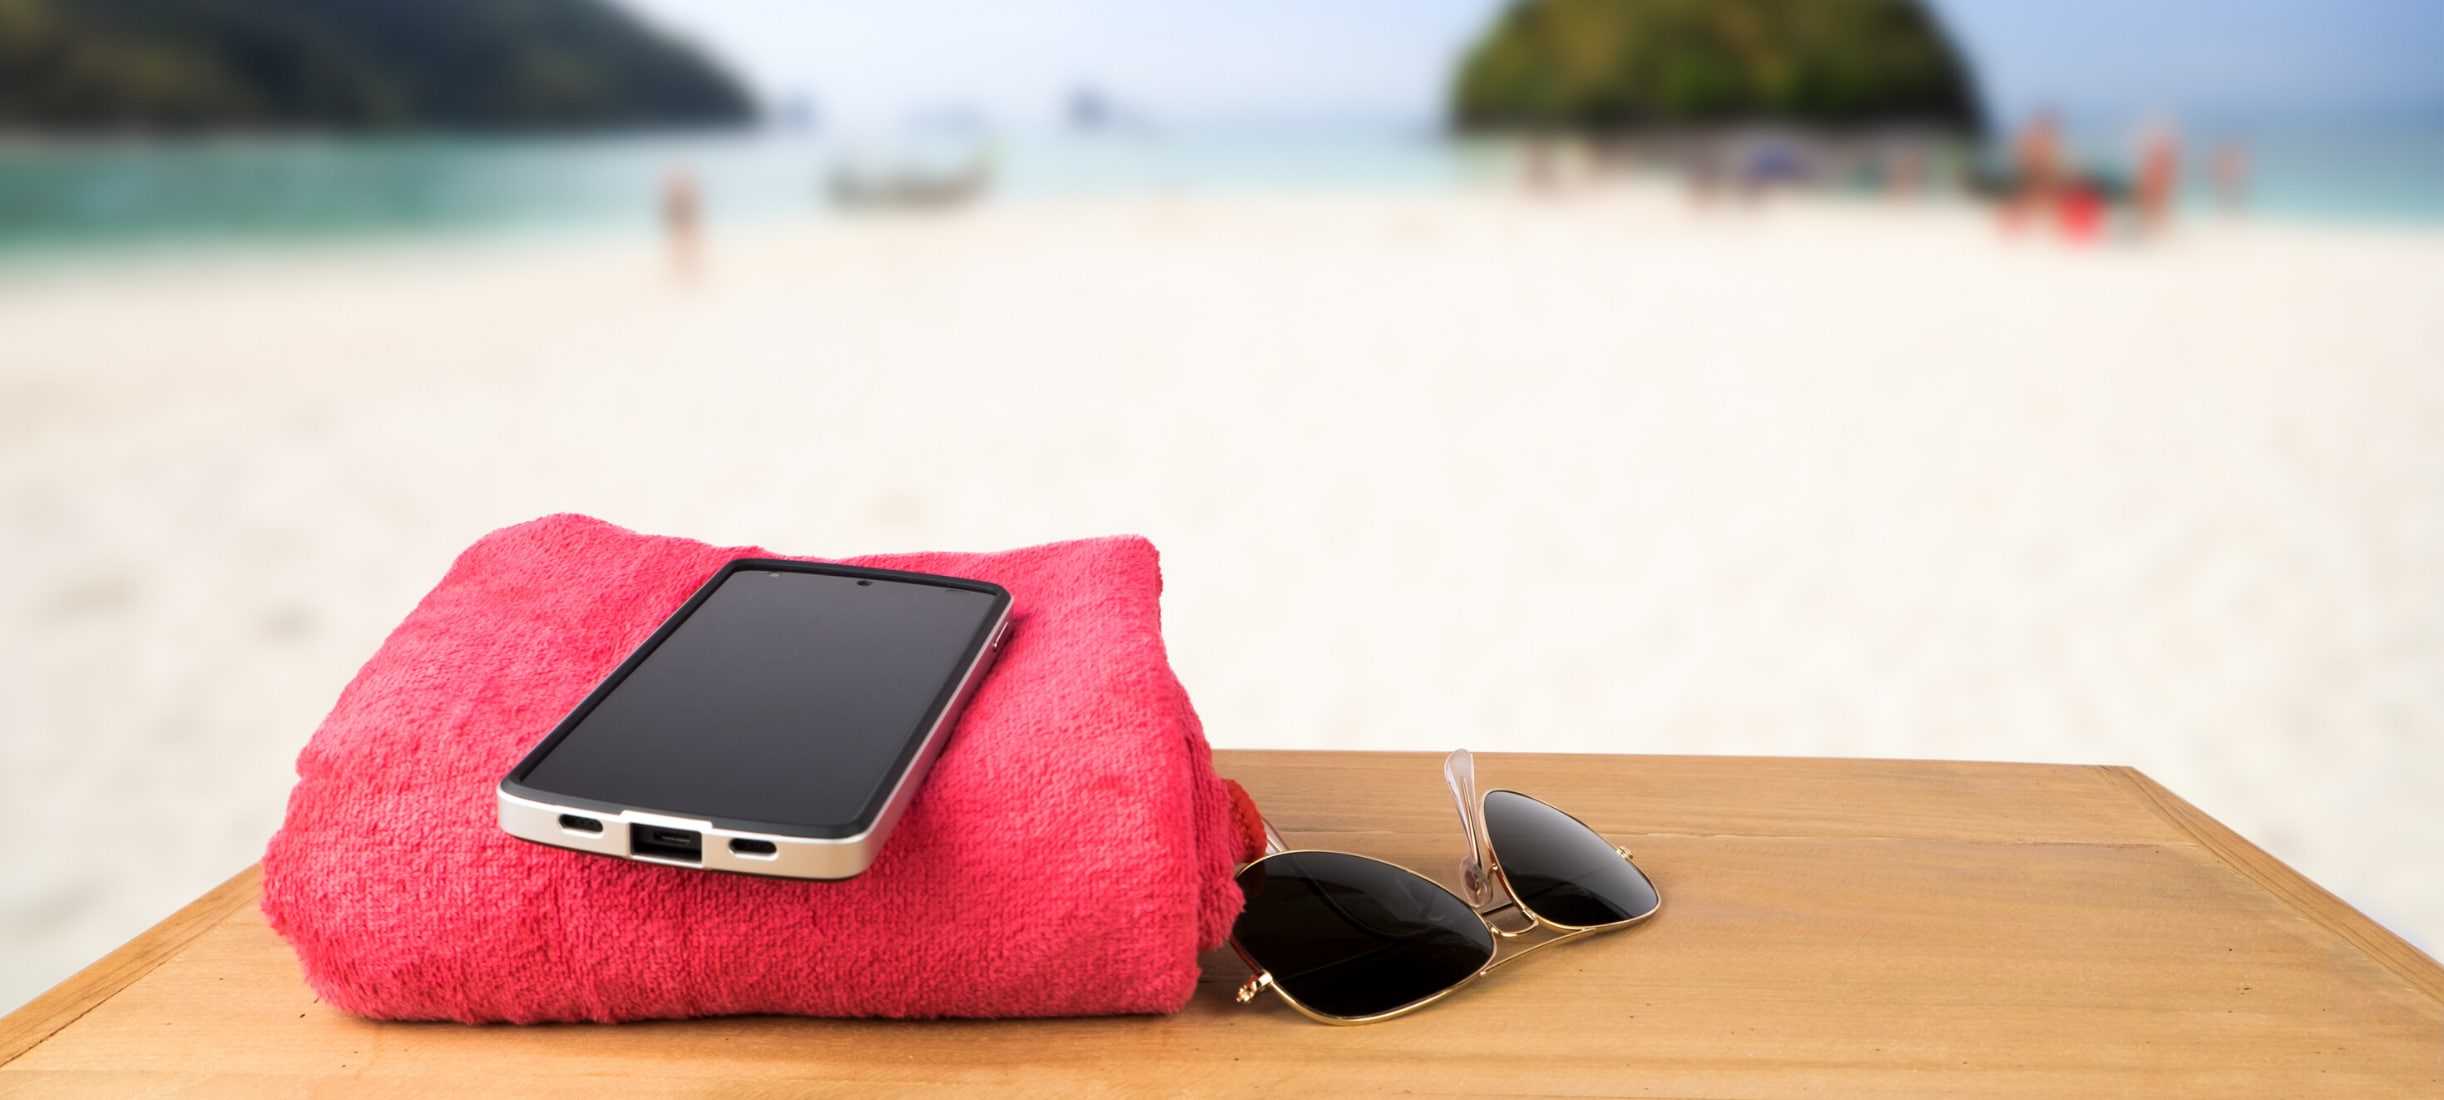 Blog - Protect your phone this summer